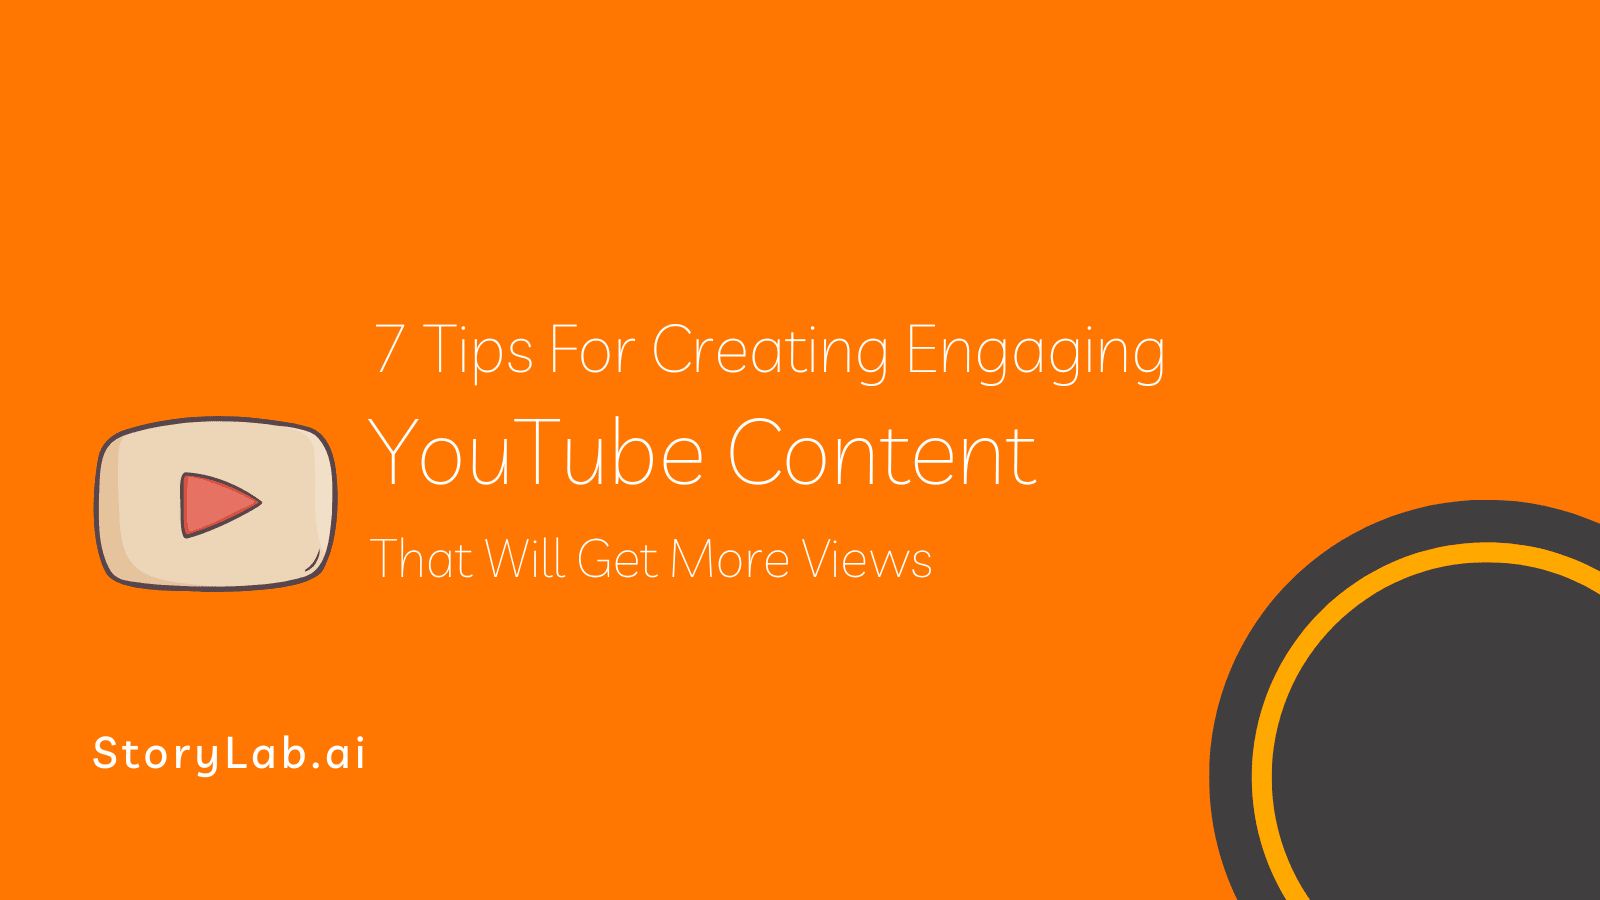 7 Practical Tips How to Create Engaging Video Content On YouTube